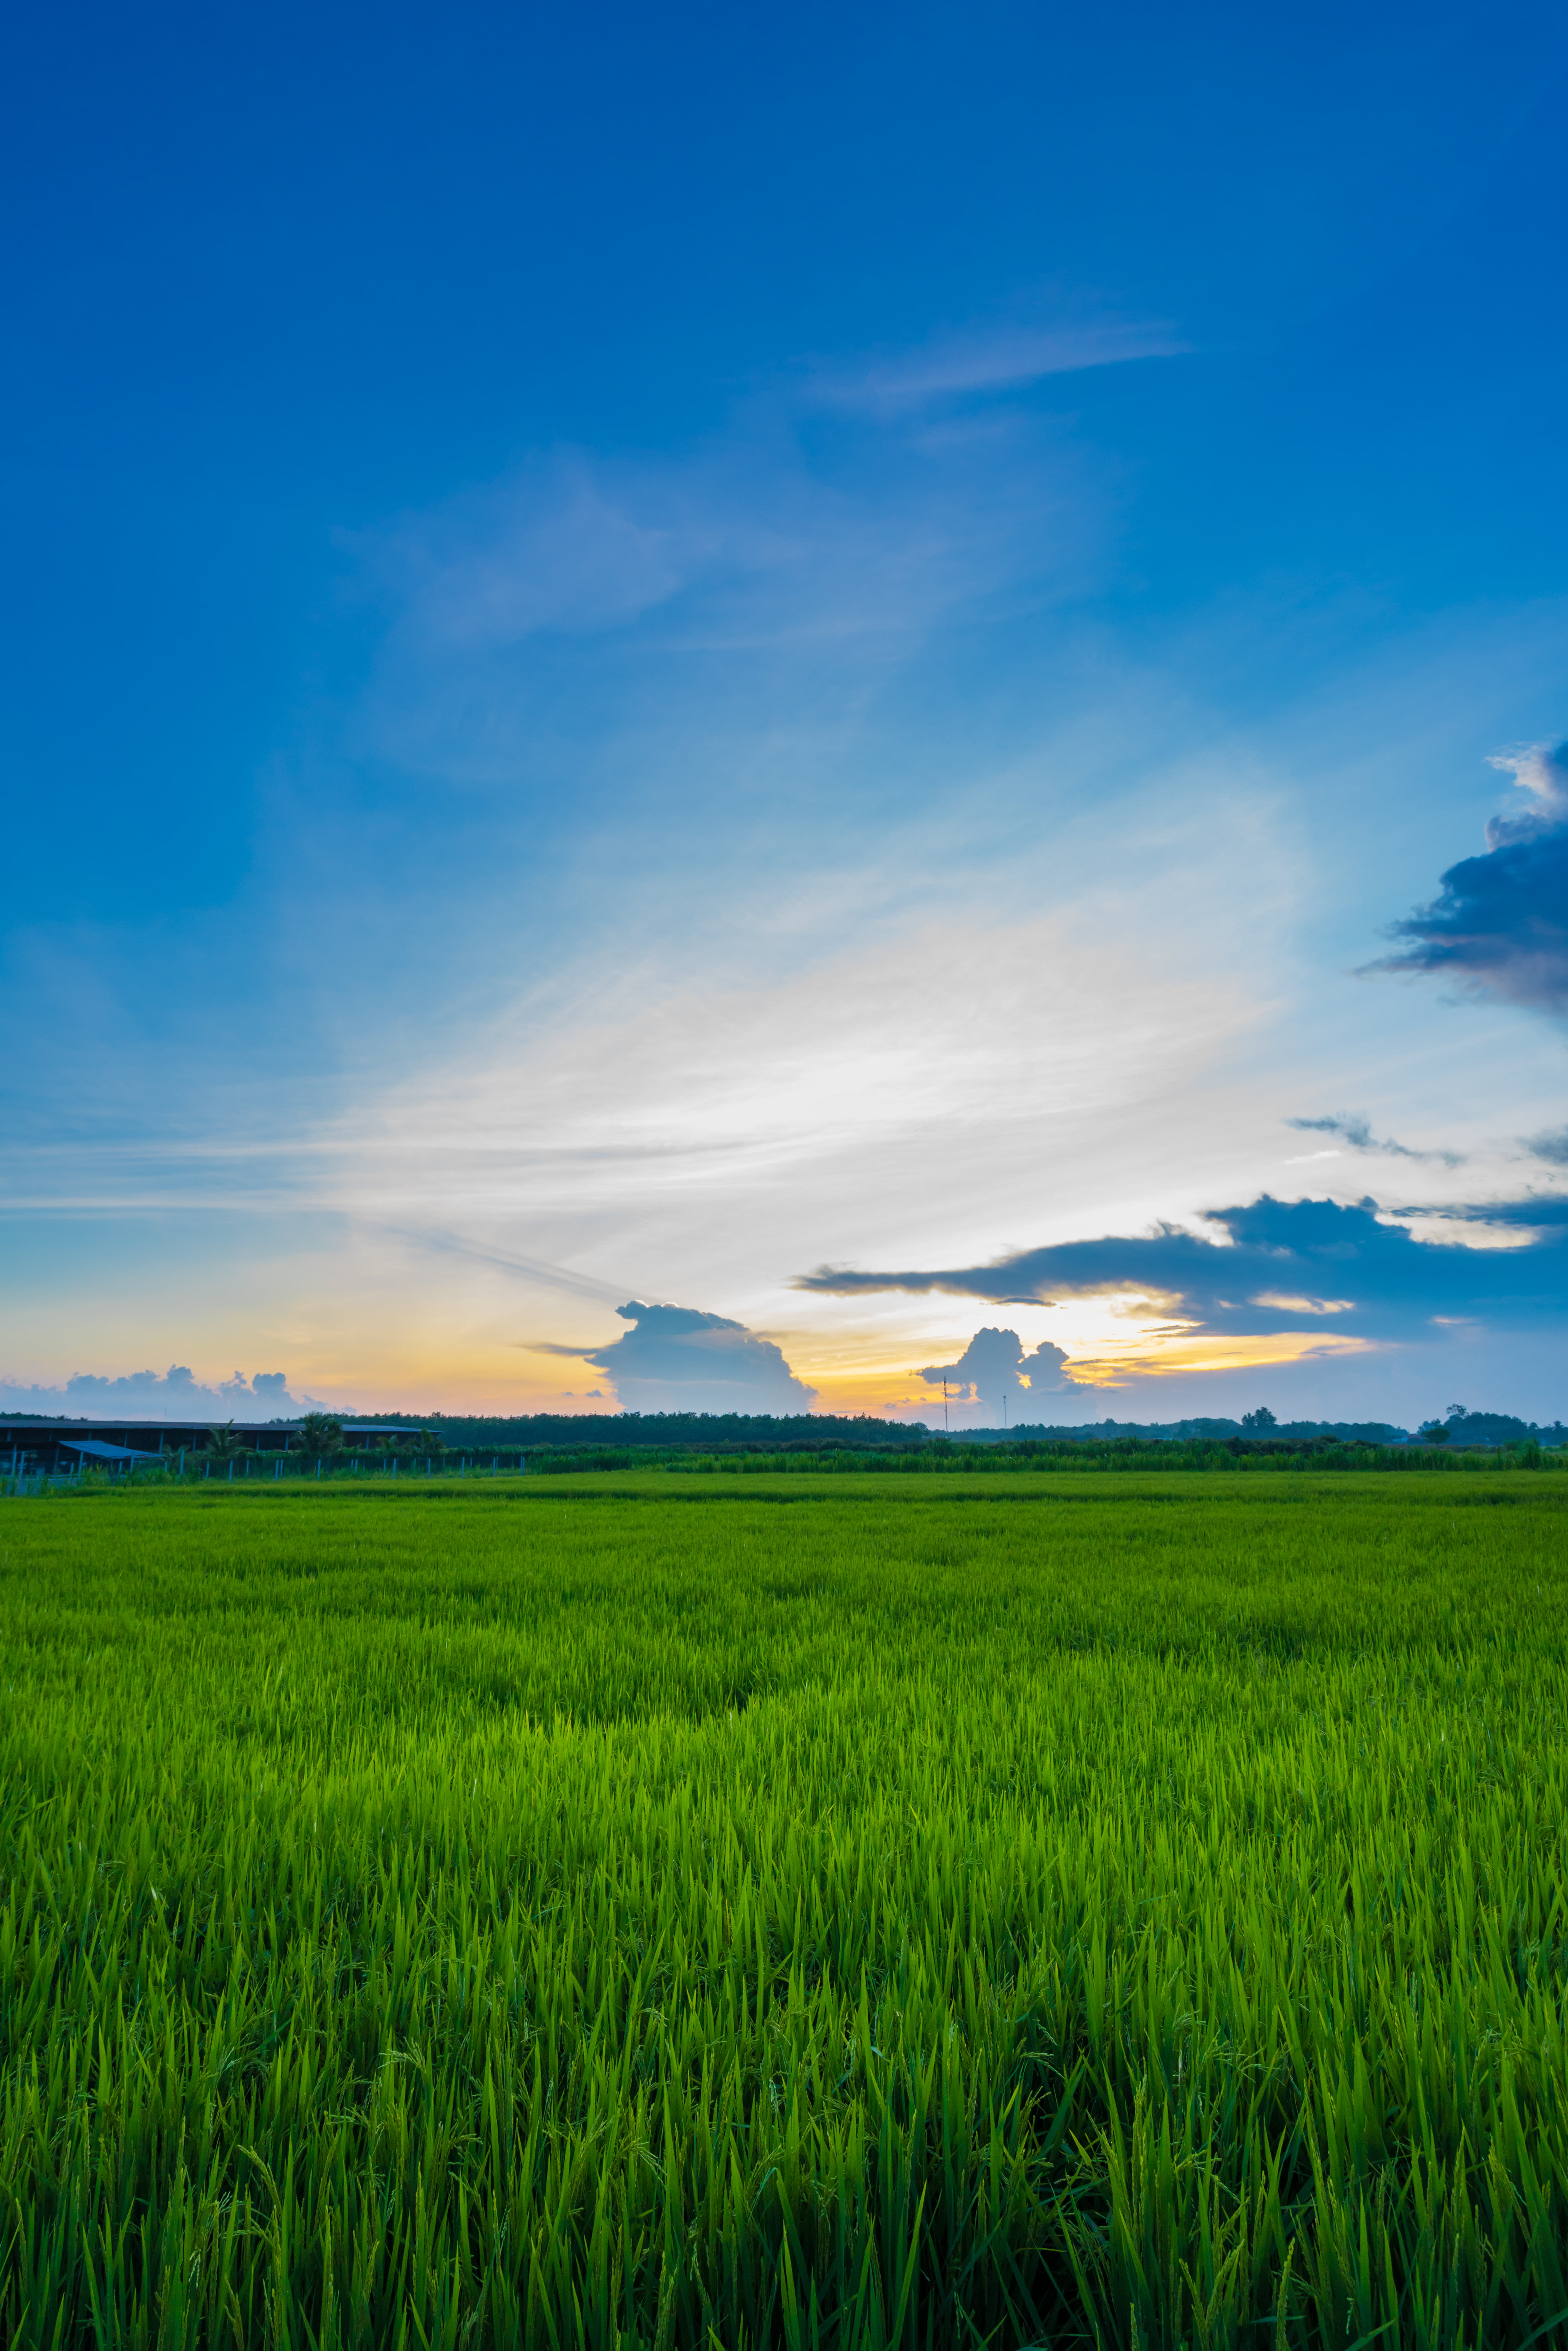 green grass field, Sunset, Vario-Tessar, ZA, sony, nature, agriculture